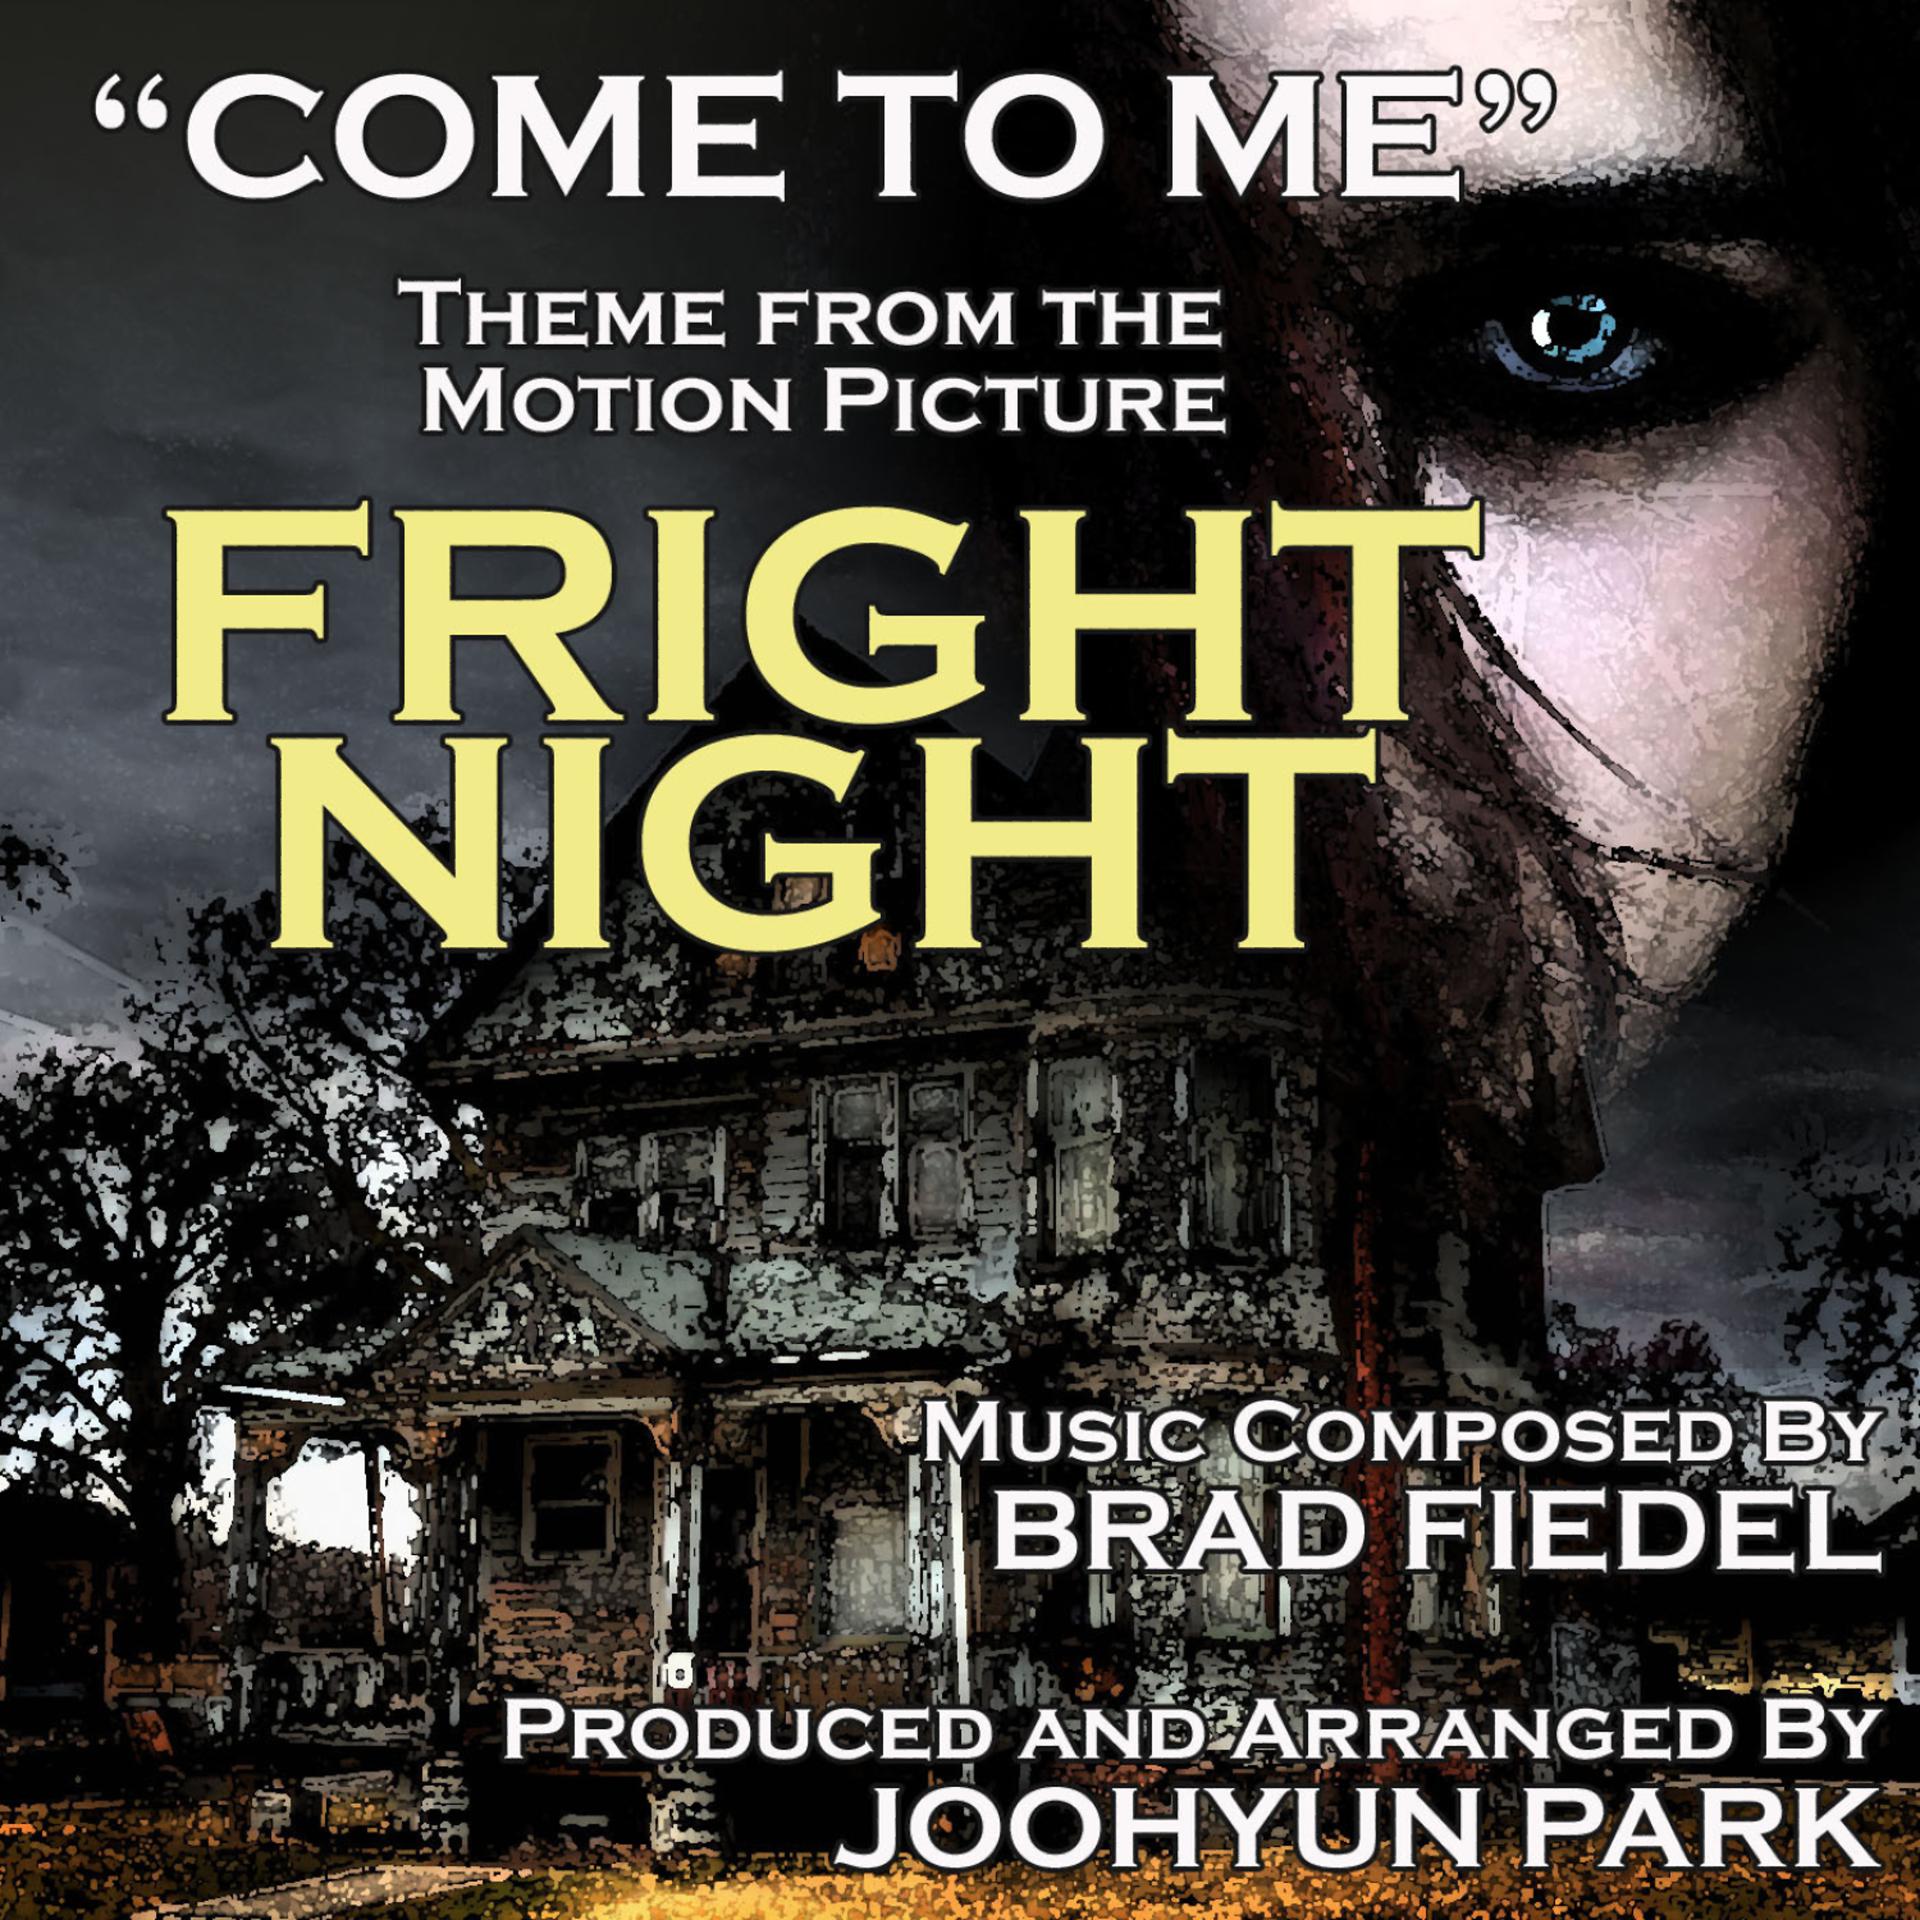 Постер альбома "Come To Me" From "Fright Night" (Brad Fiedel)